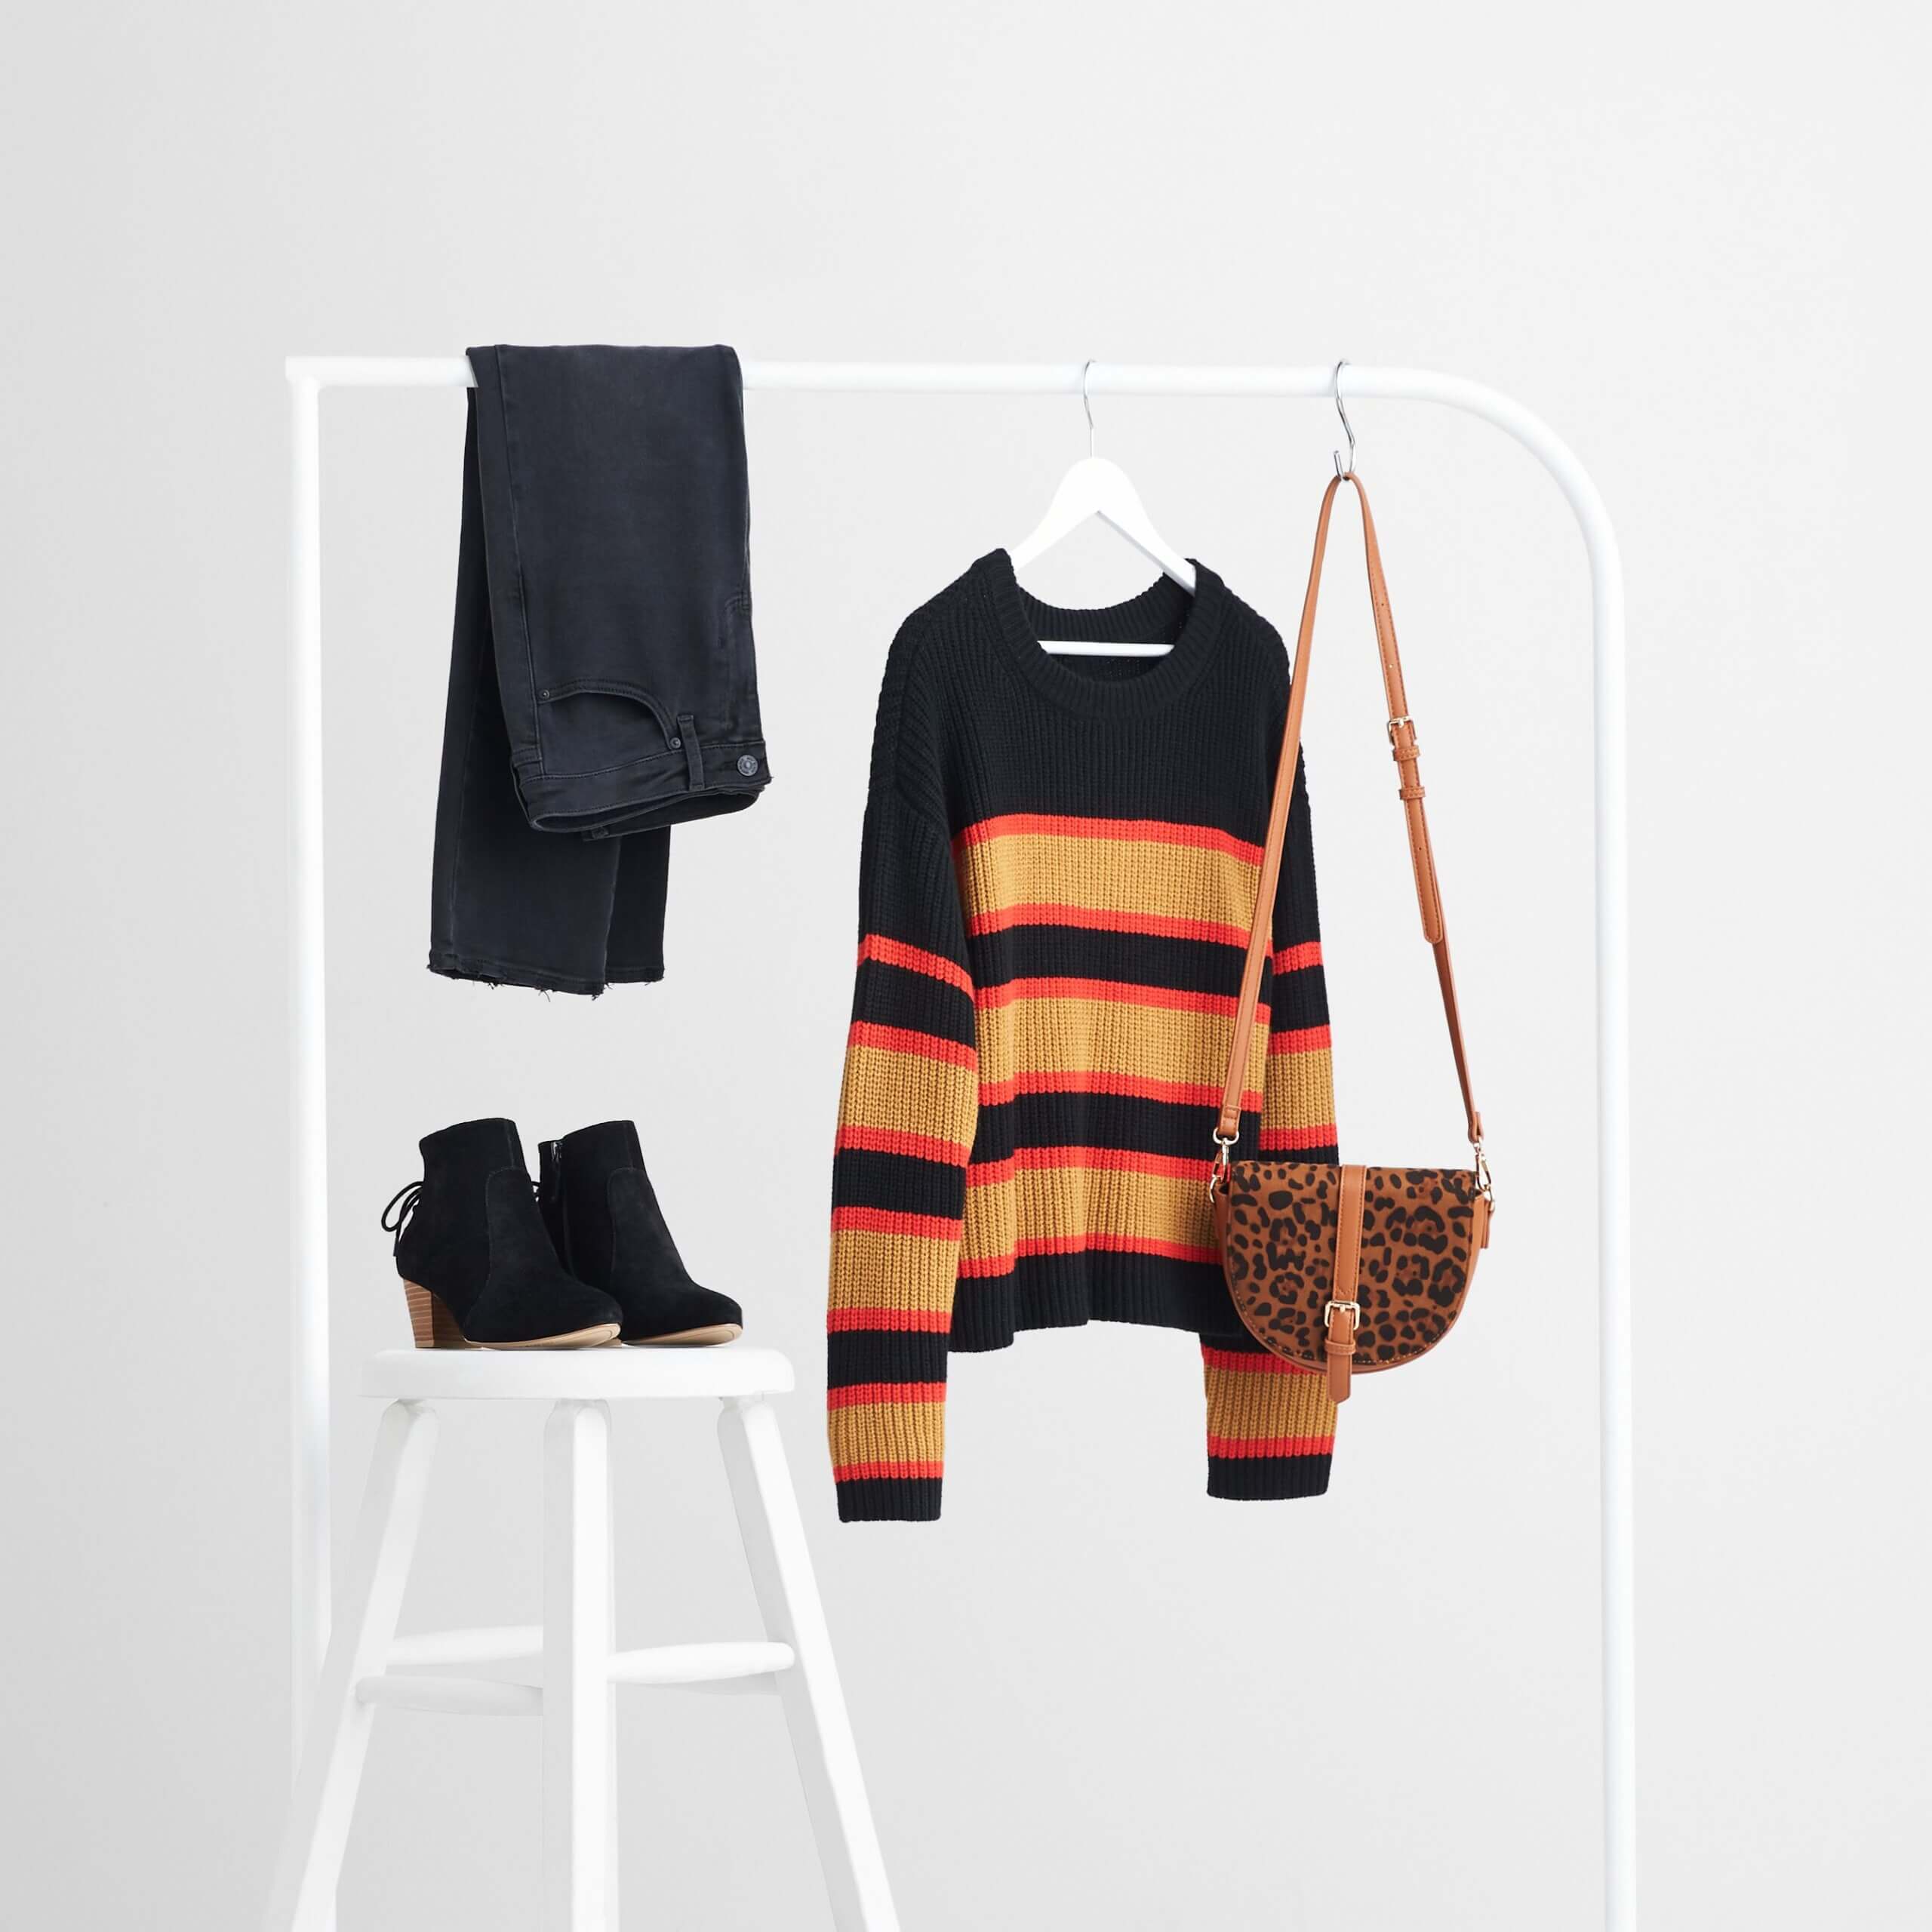 Stitch Fix Women's rack image with brown animal-print purse, black pullover sweater with orange stripes and black jeans on white rack, next to black booties on a white stool.